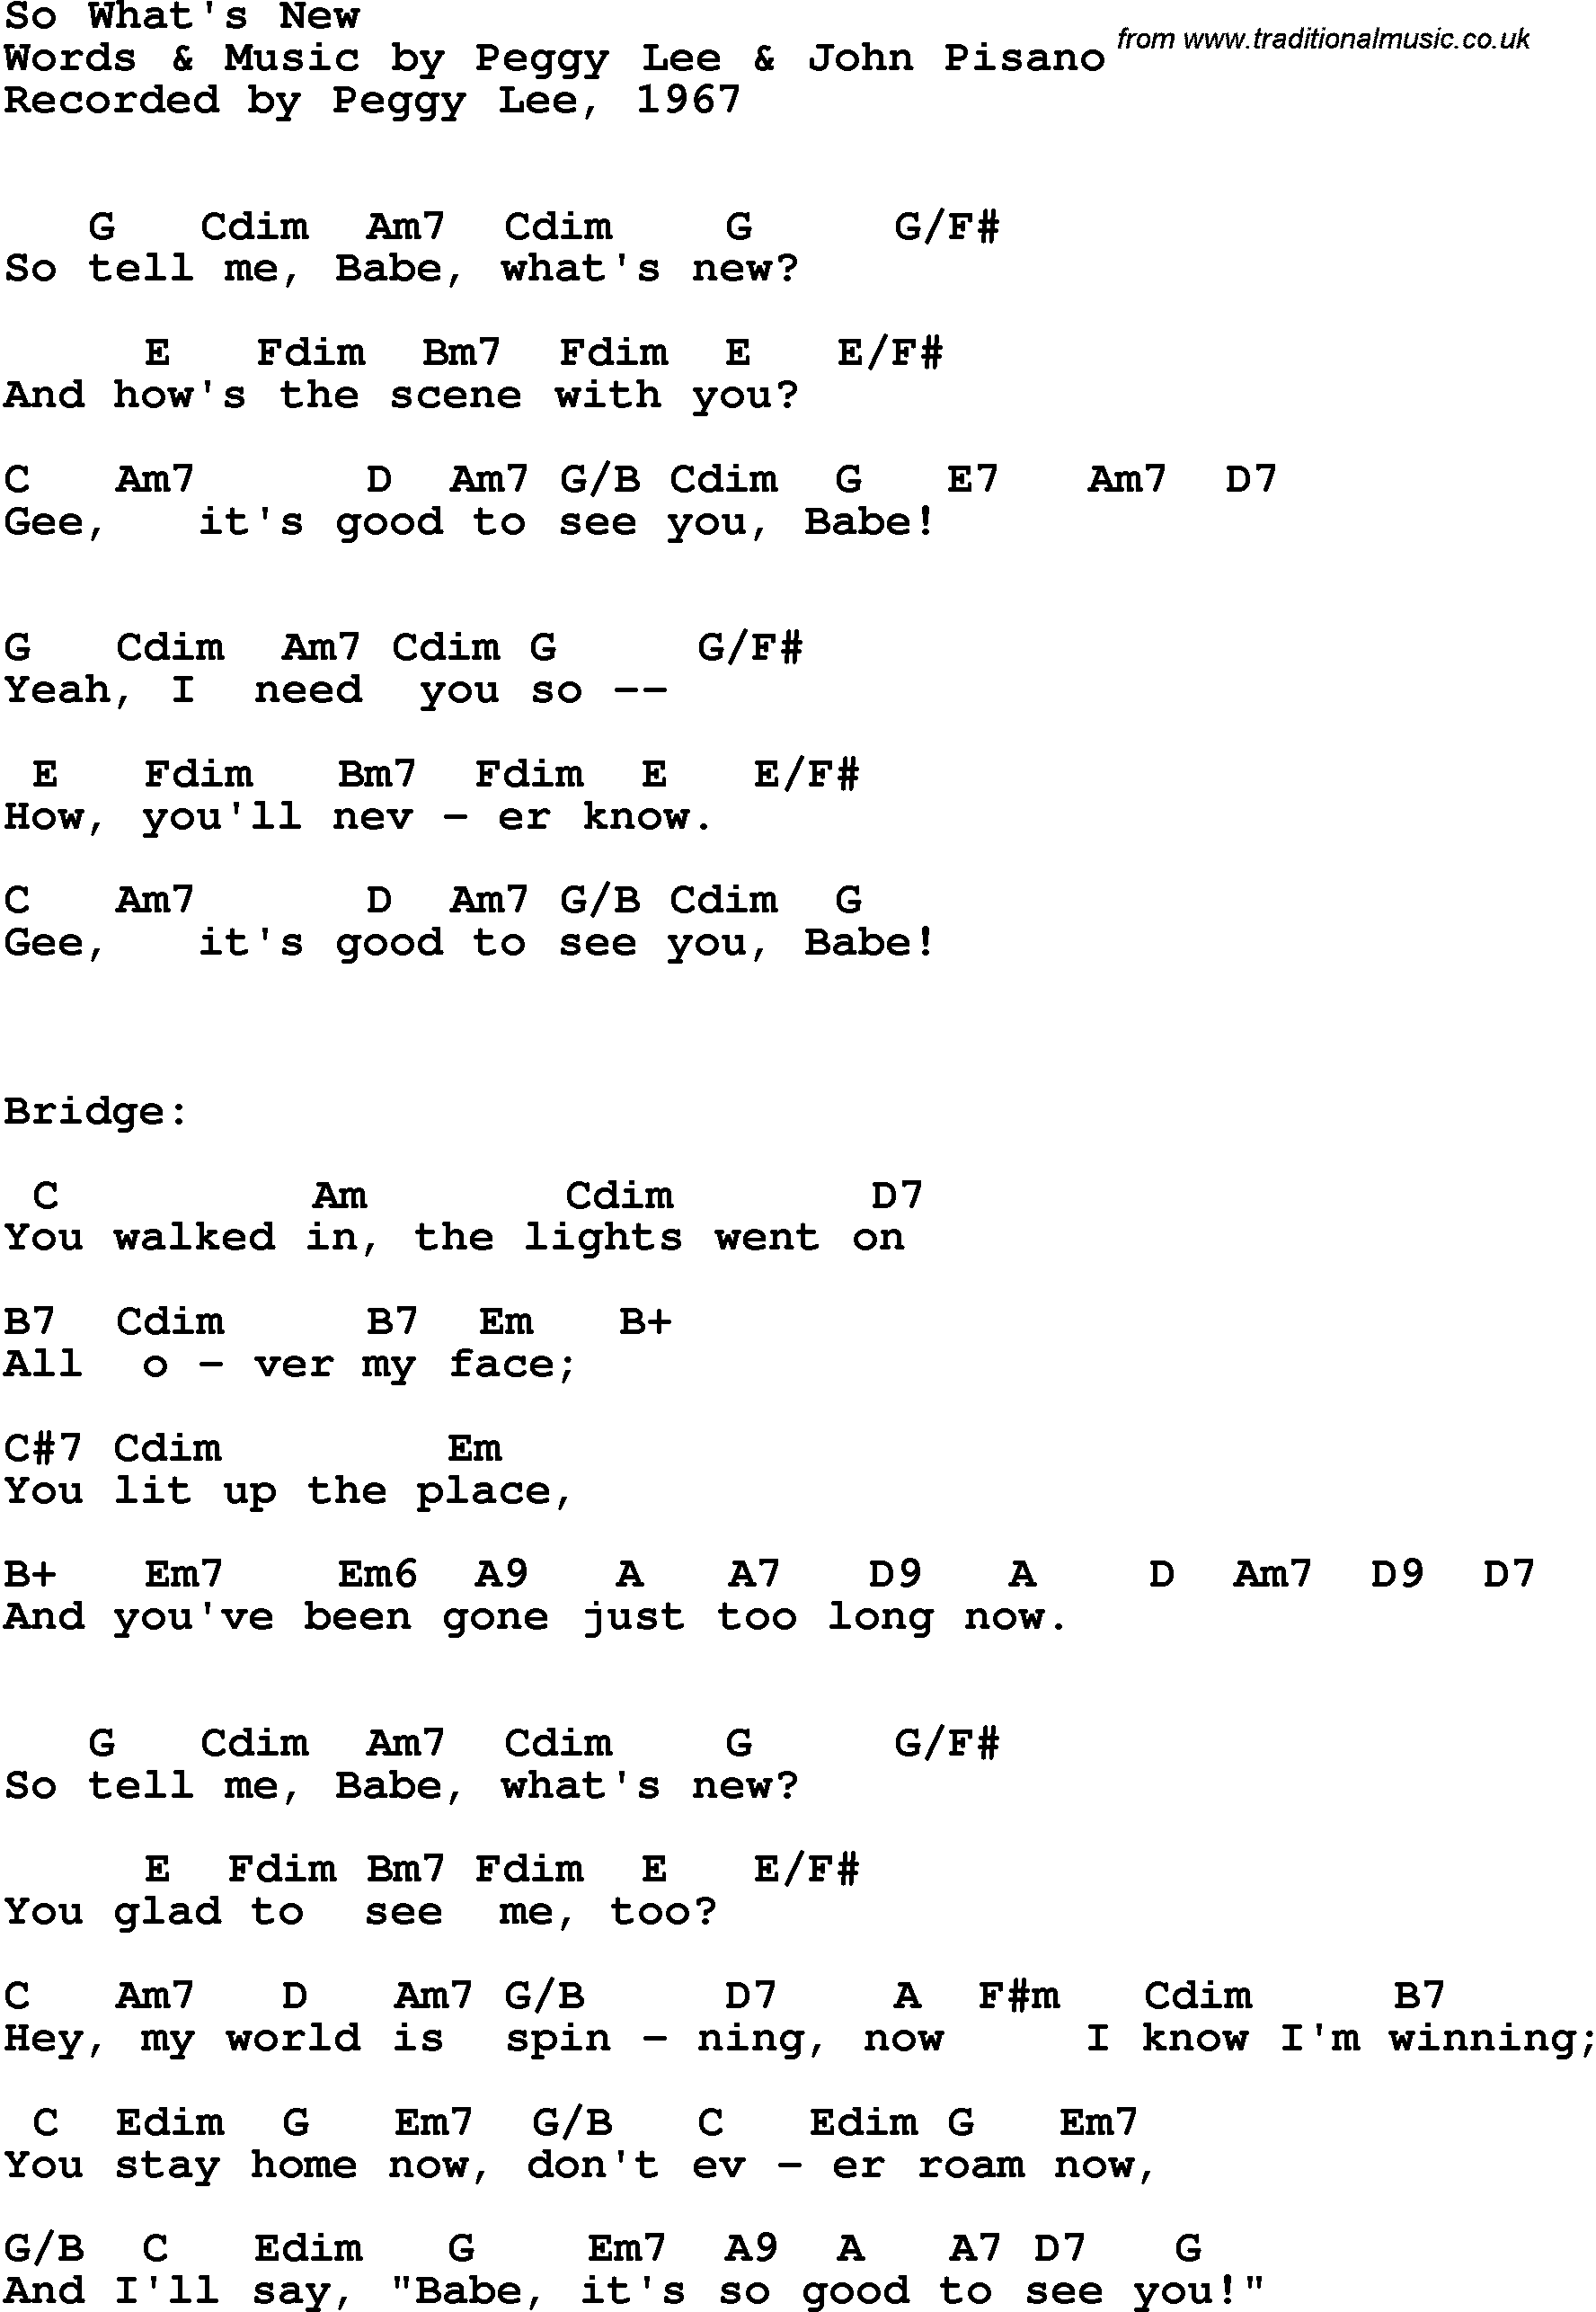 Song Lyrics with guitar chords for So What's New - Peggy Lee, 1967